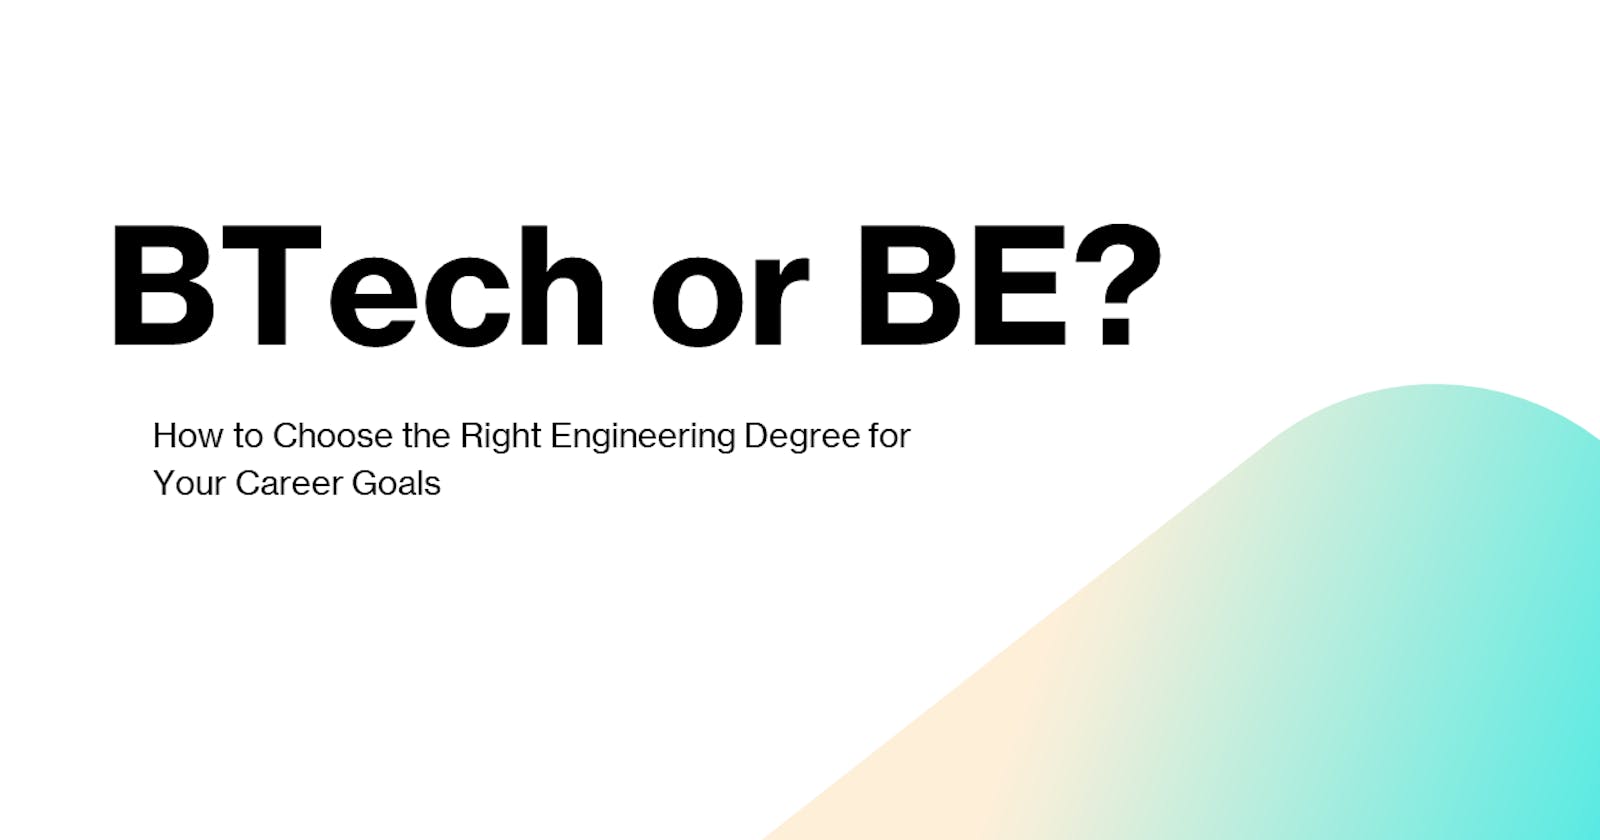 BTech or BE: How to Choose the Right Engineering Degree for Your Career Goals